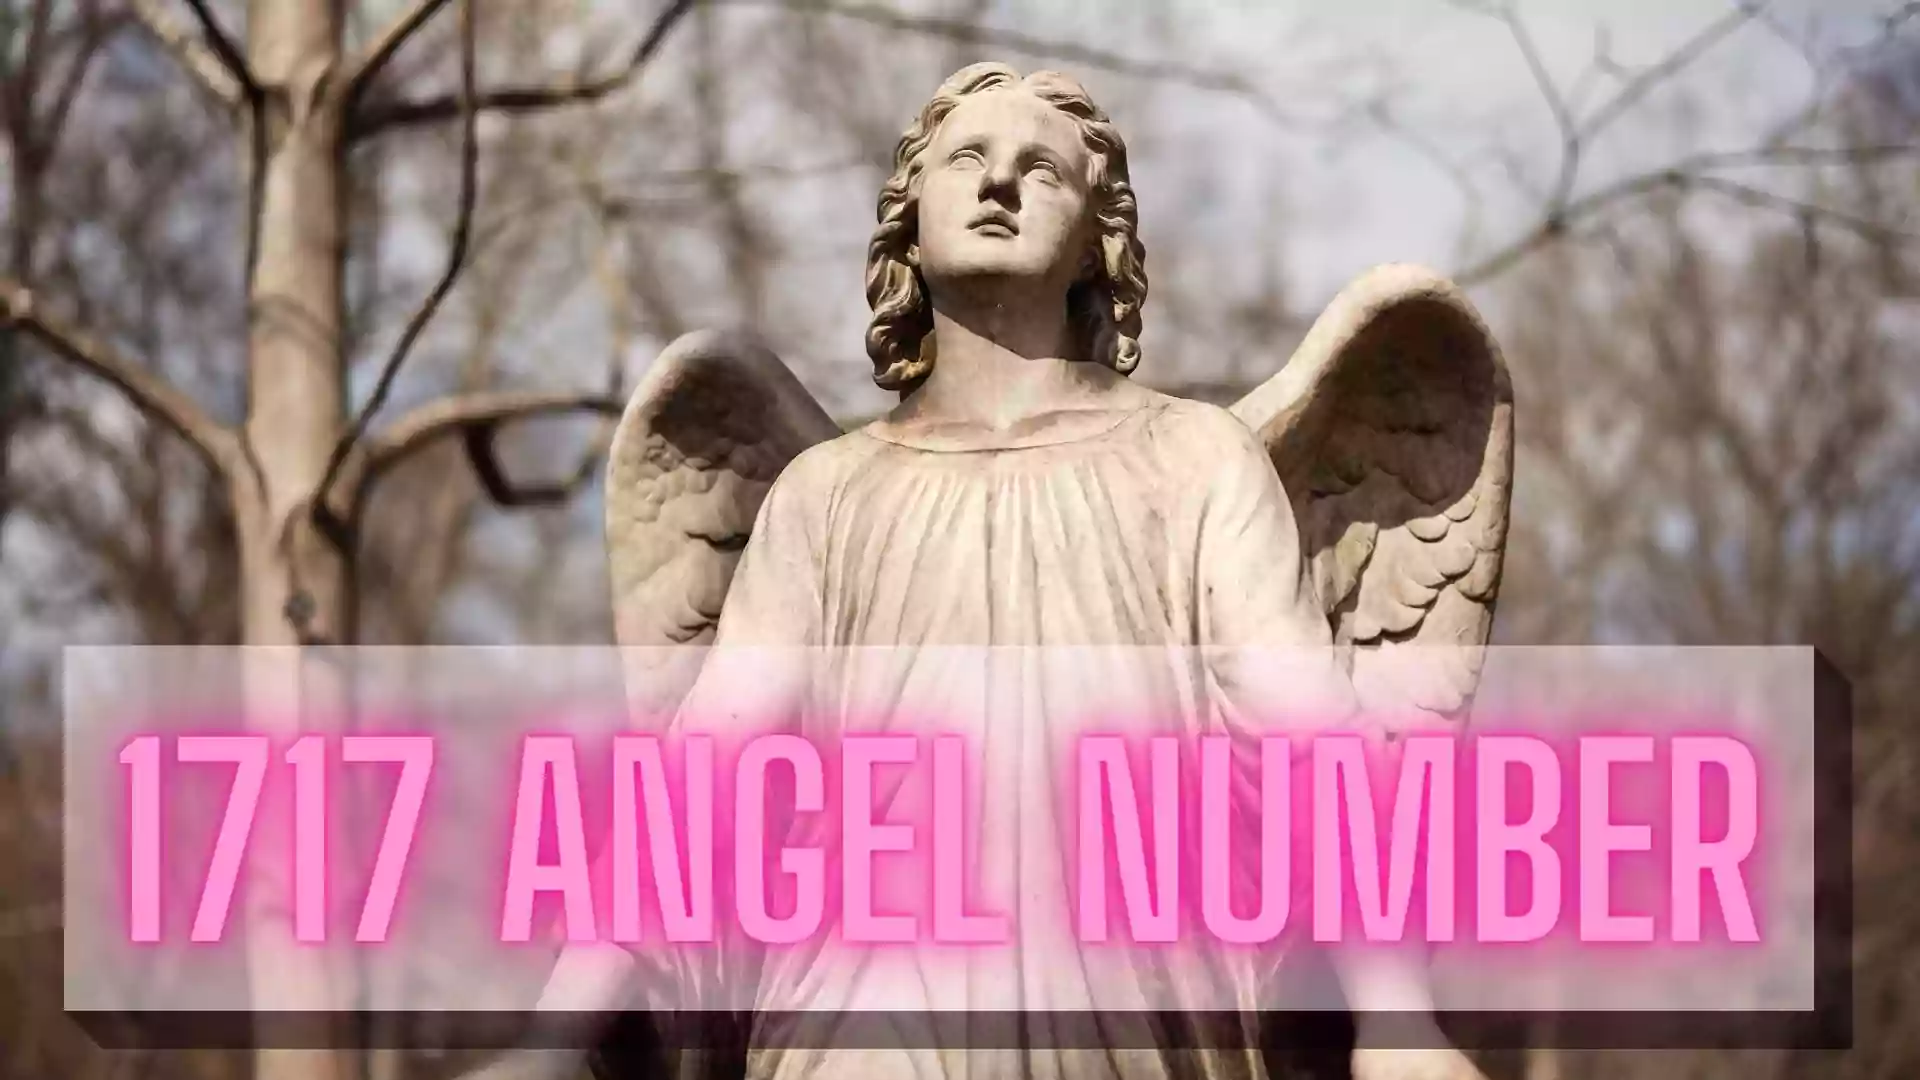 Recognizing and Interpreting the Message Behind Angel Number 1717